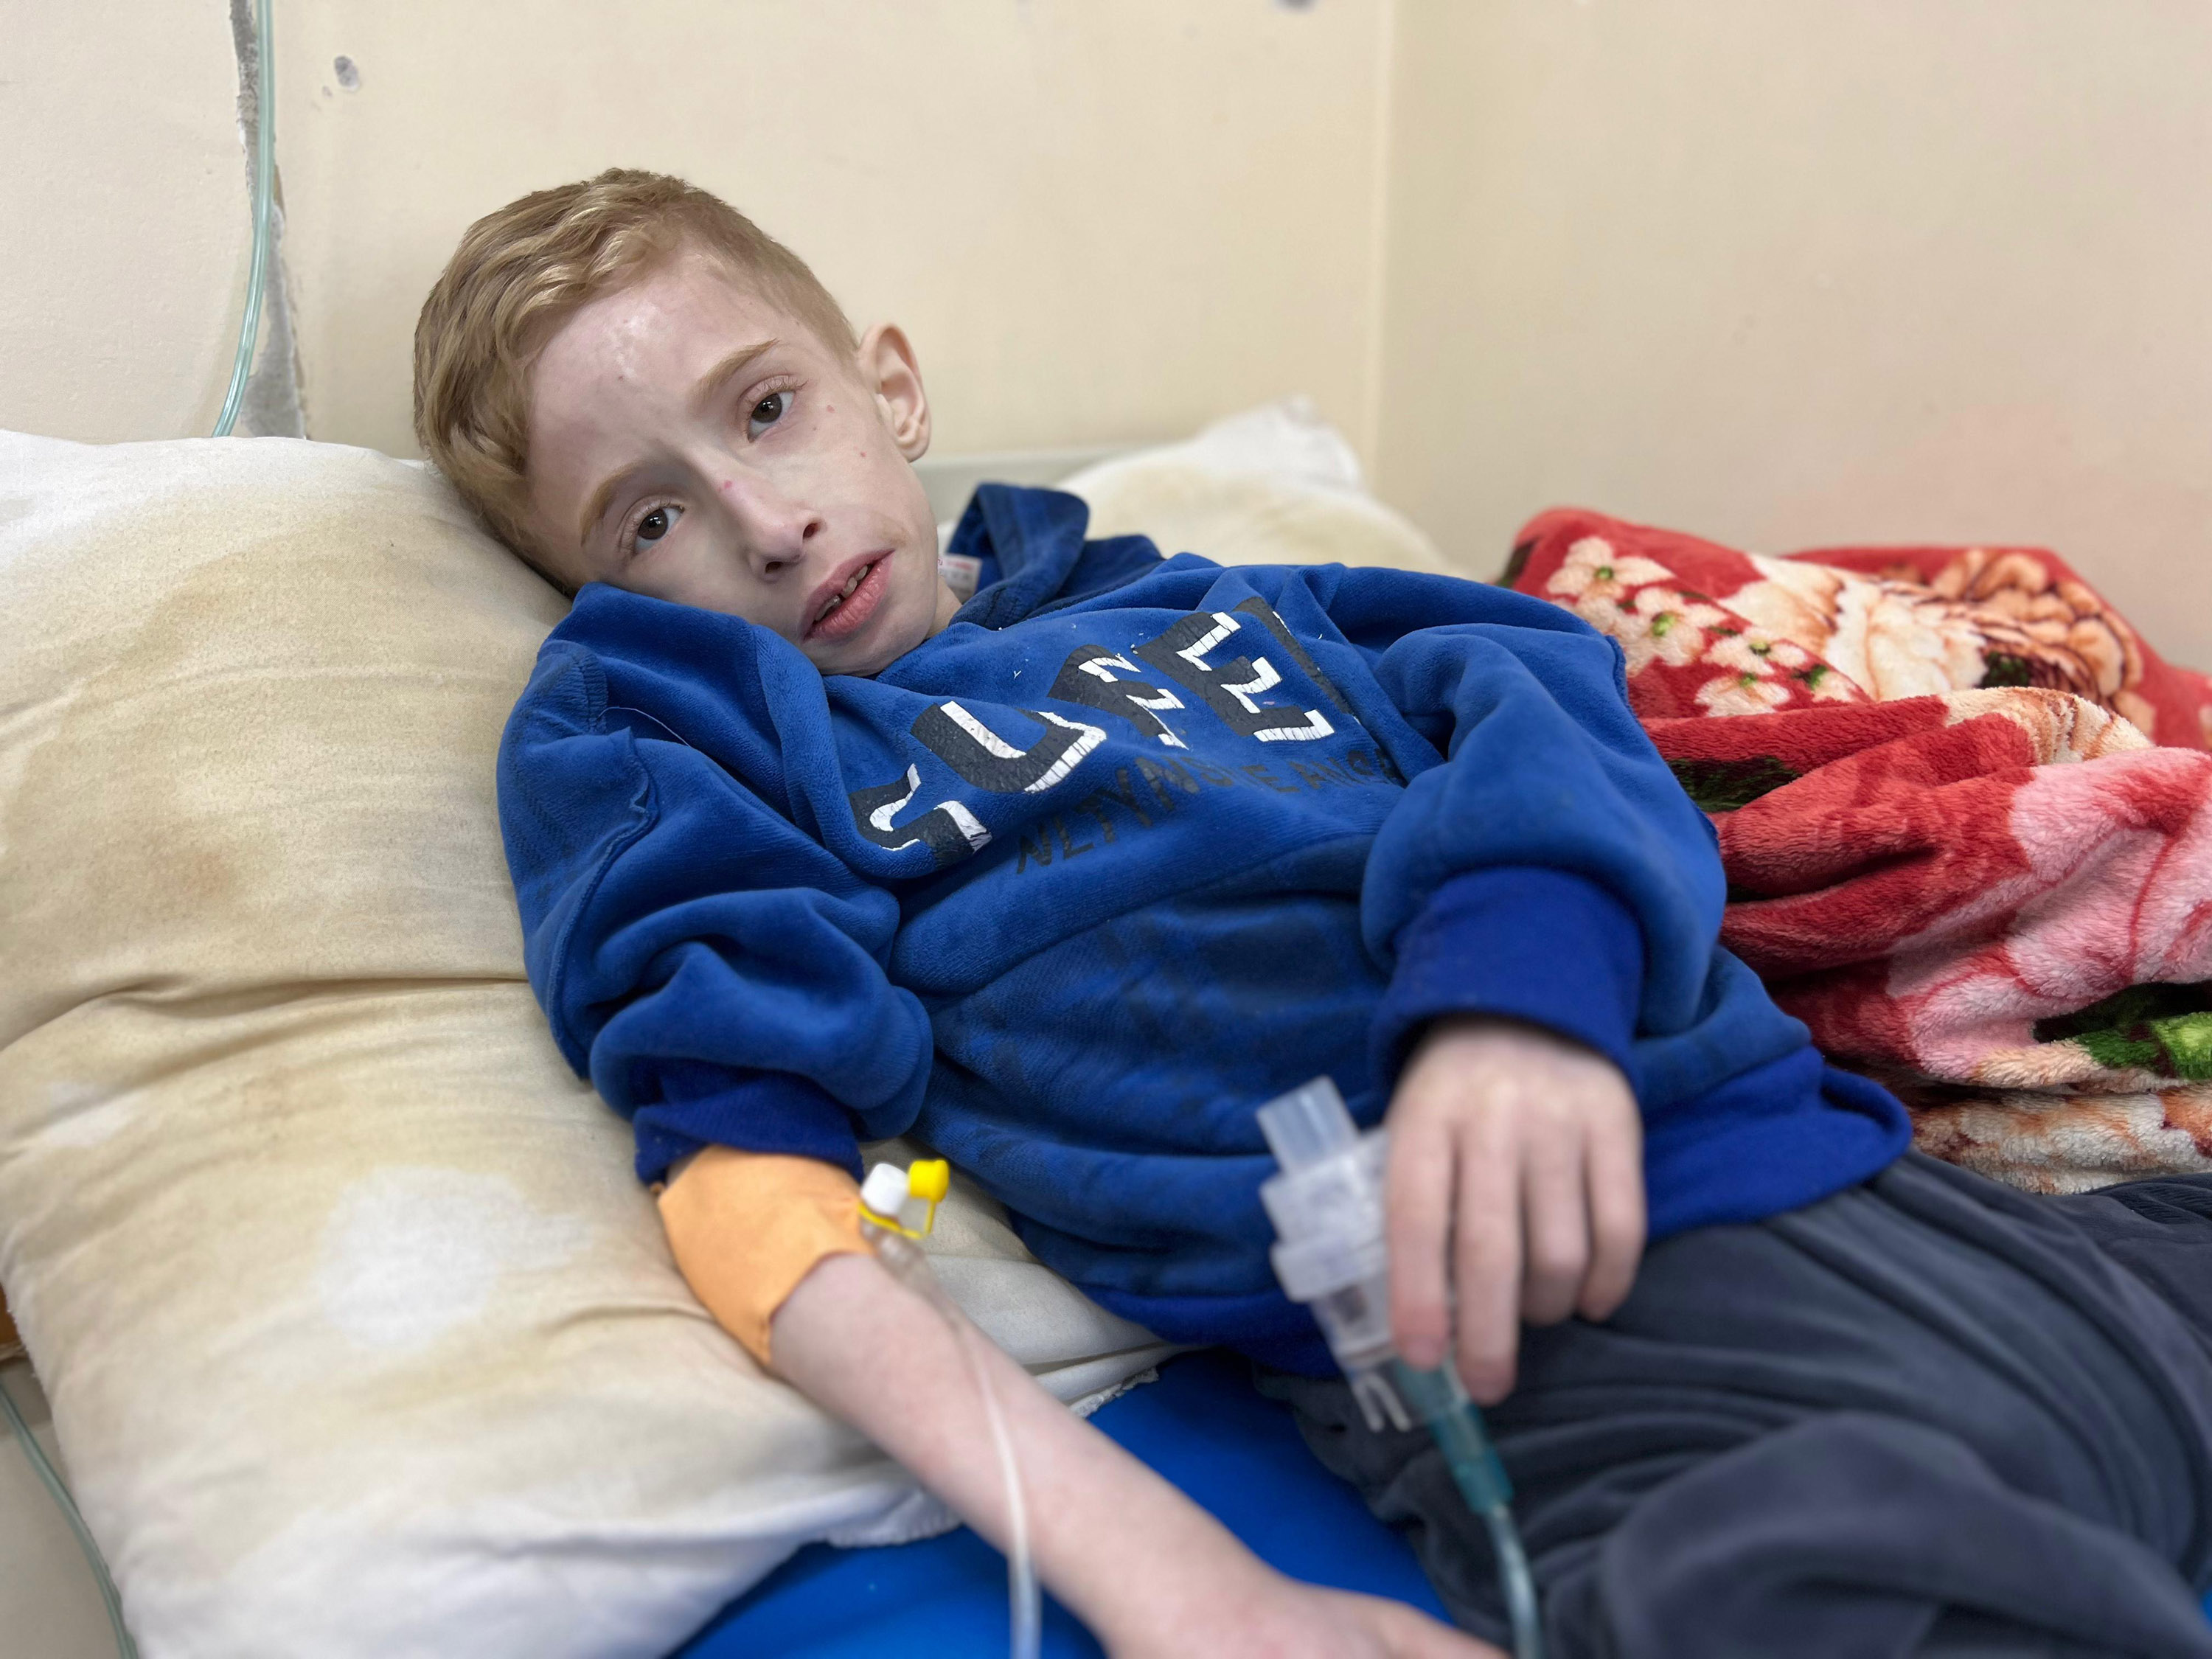 Six-year-old Fadi Al-Zanat is pictured on March 10 at Kamal Adwan Hospital in Beit Lahia, Gaza, where he is suffering from severe malnutrition and dehydration, according to the health ministry in the strip.